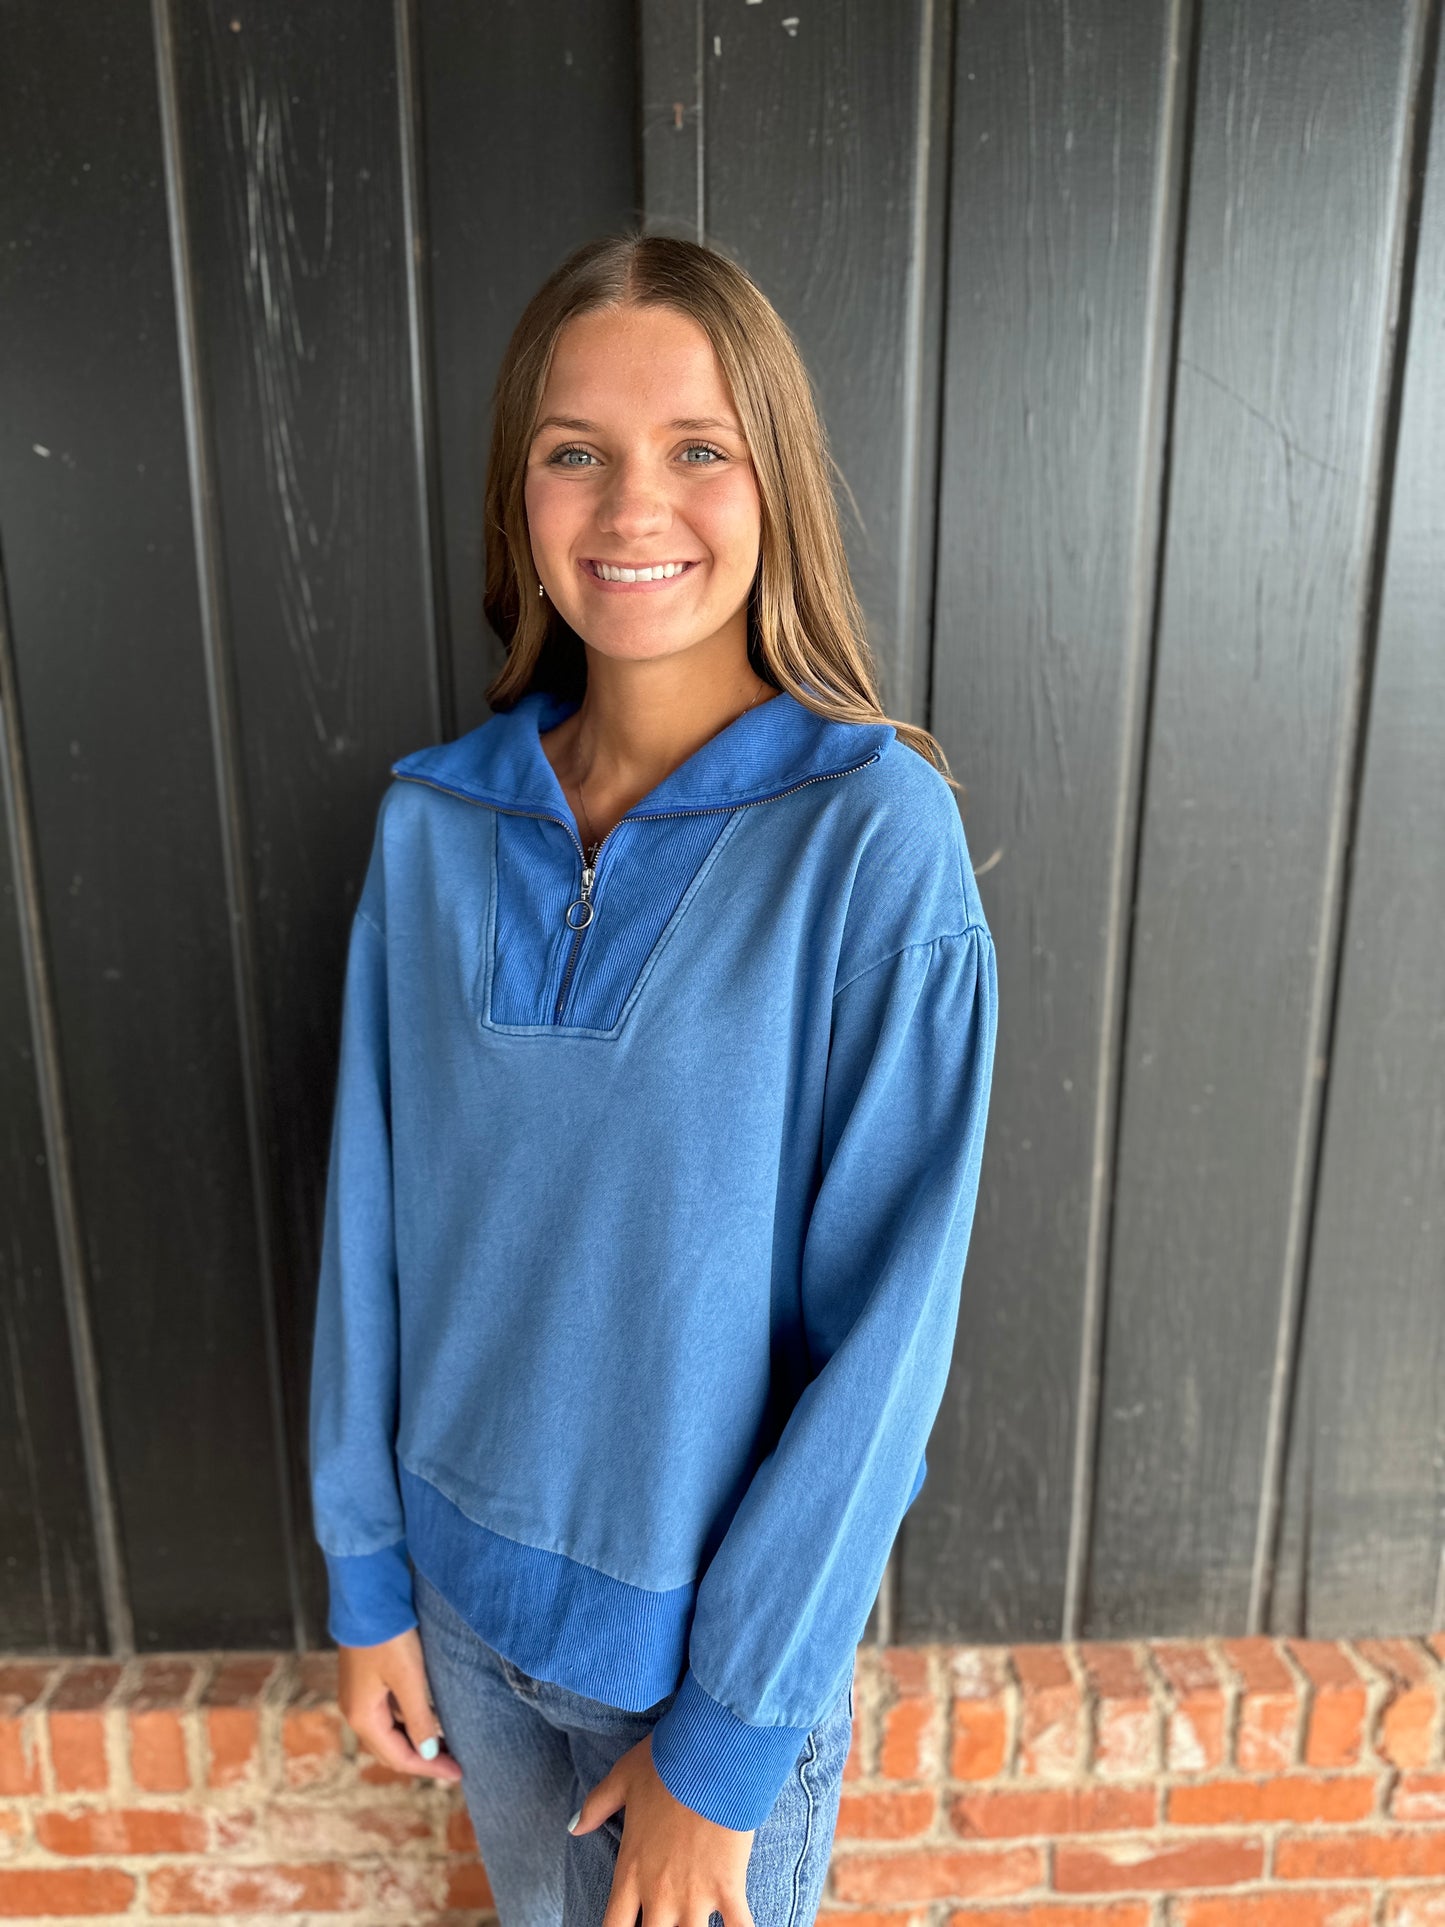 The Saylor Blue Mineral Wash Zip up Top